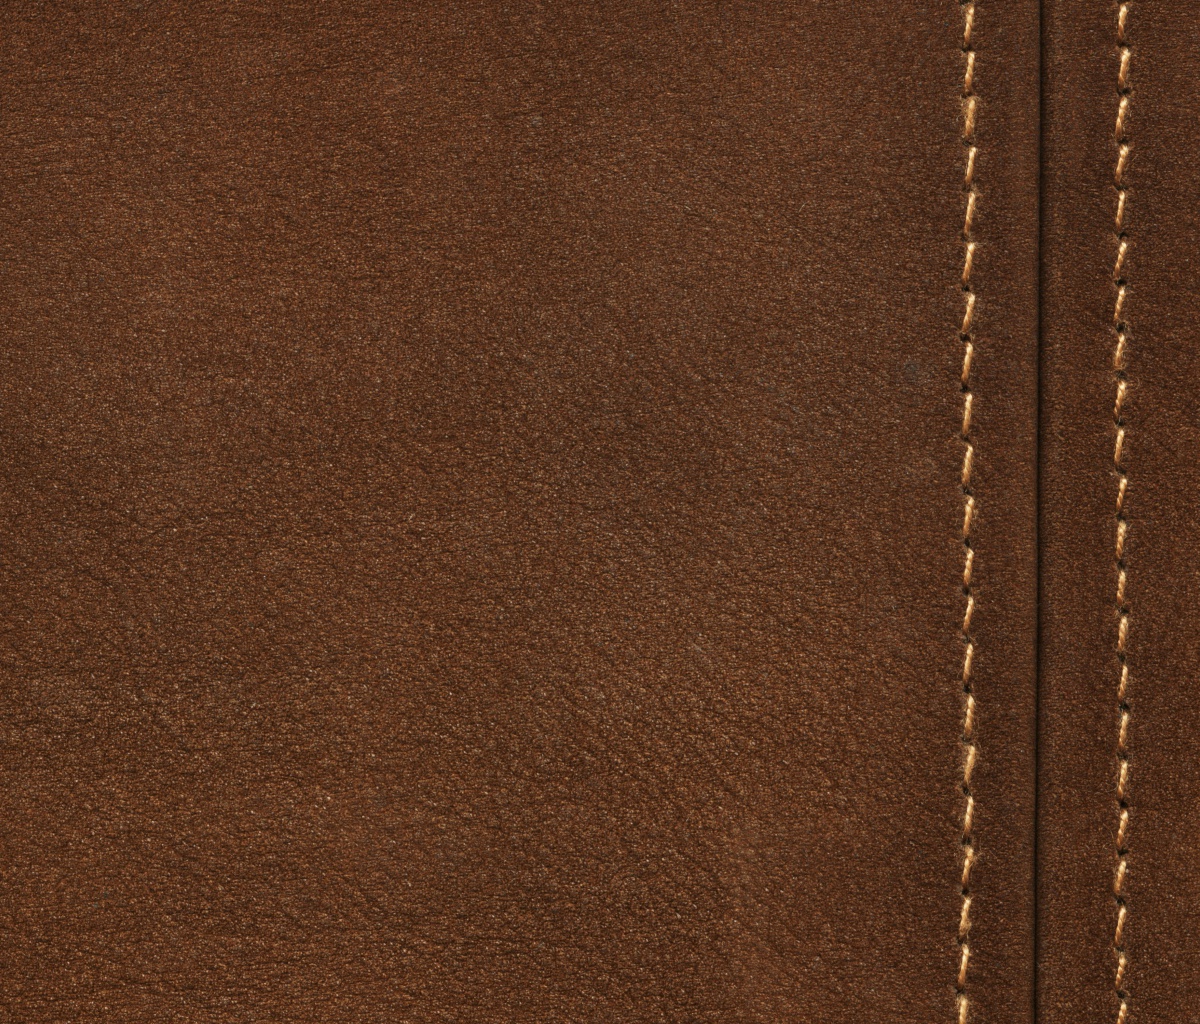 Brown Leather with Seam screenshot #1 1200x1024